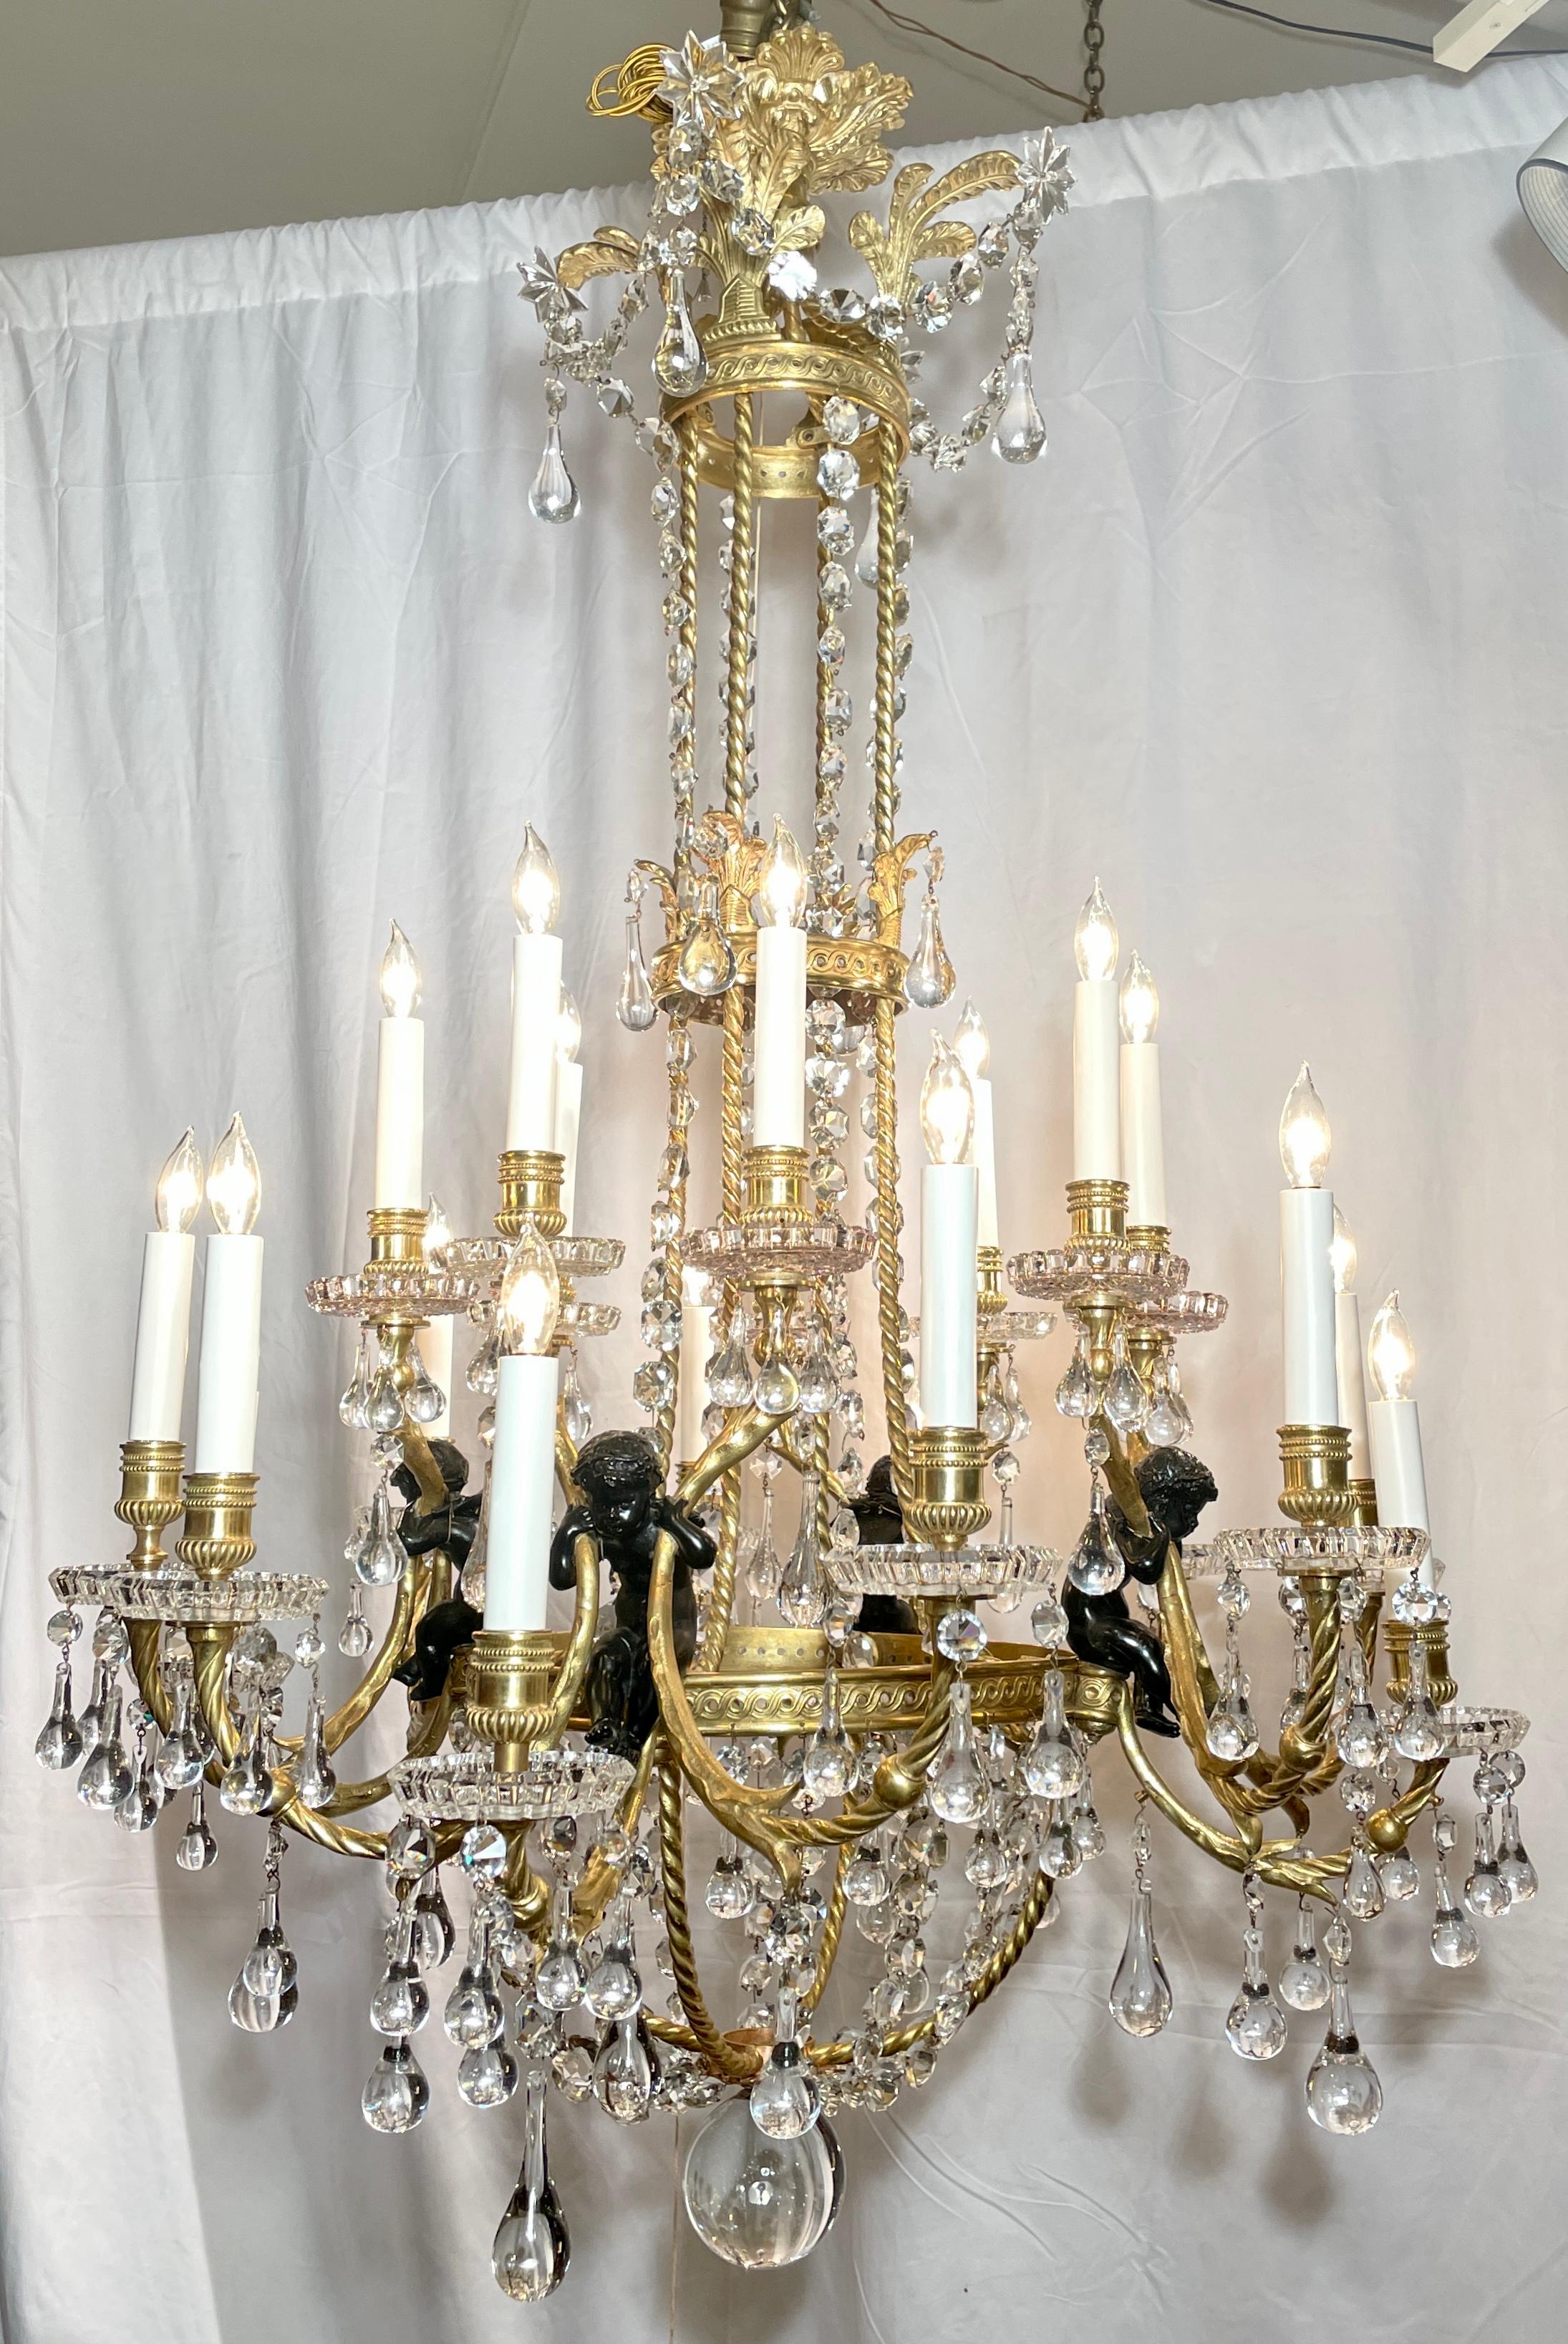 Magnificent antique French baccarat crystal & bronze d'ore chandelier, circa 1890. 
Fine gold & patinated bronze figures & mounts.